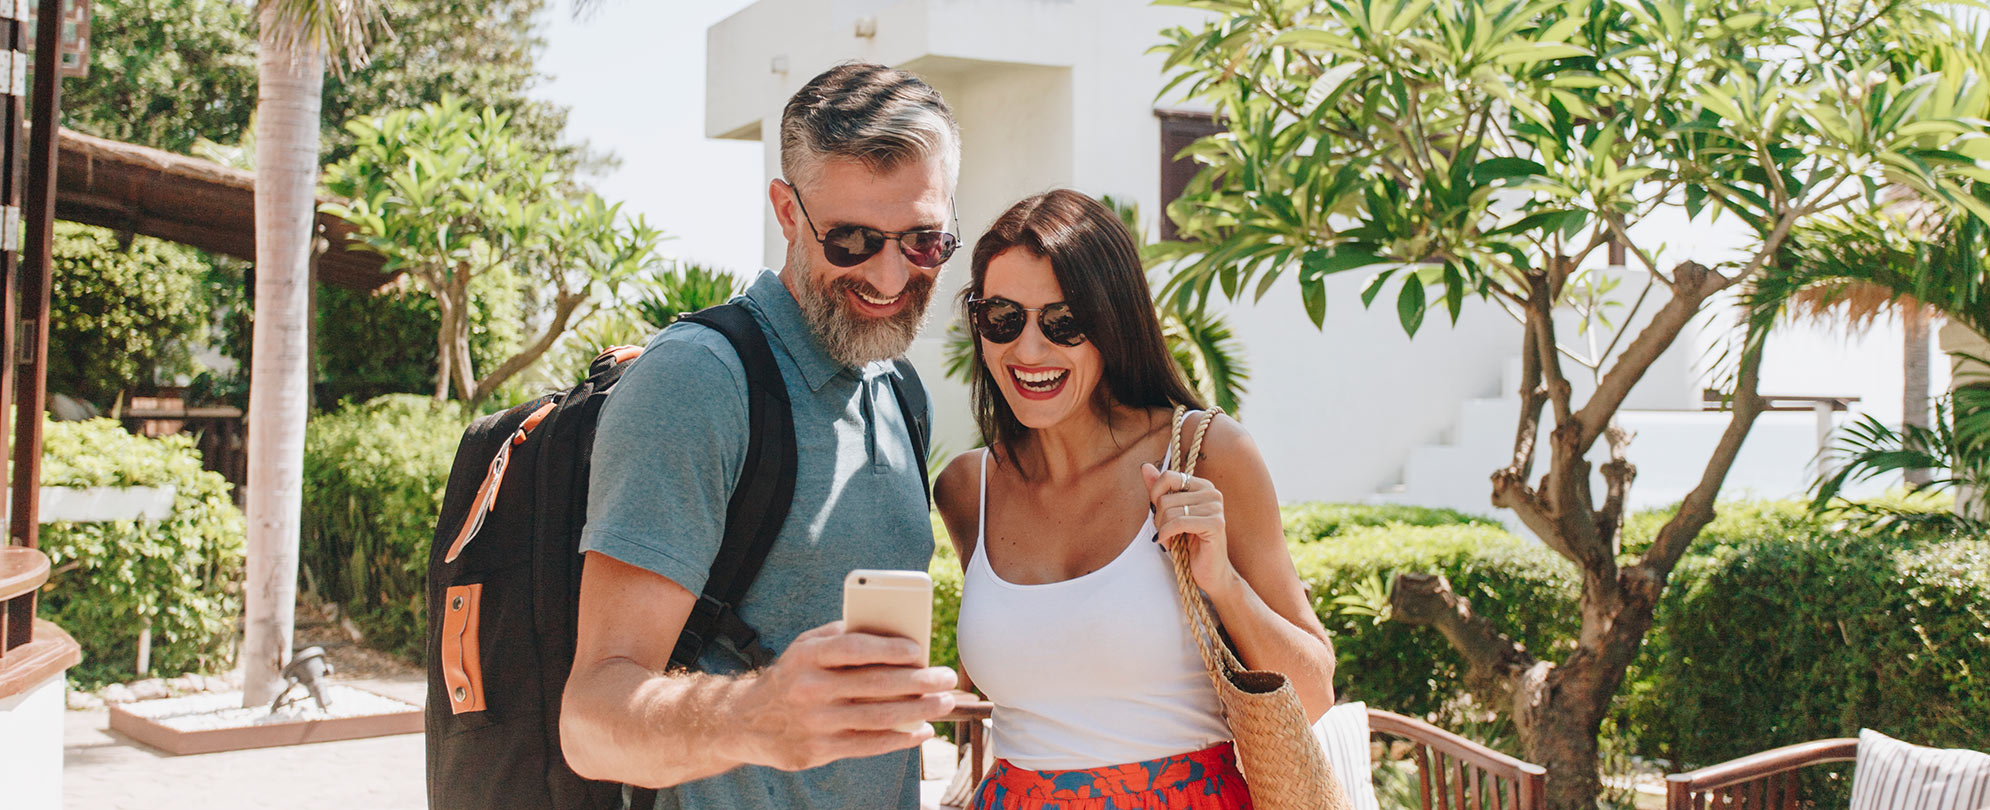 A man and a woman, both smiling and wearing sunglasses, stand in a sunny courtyard looking at something on the man's cell phone.